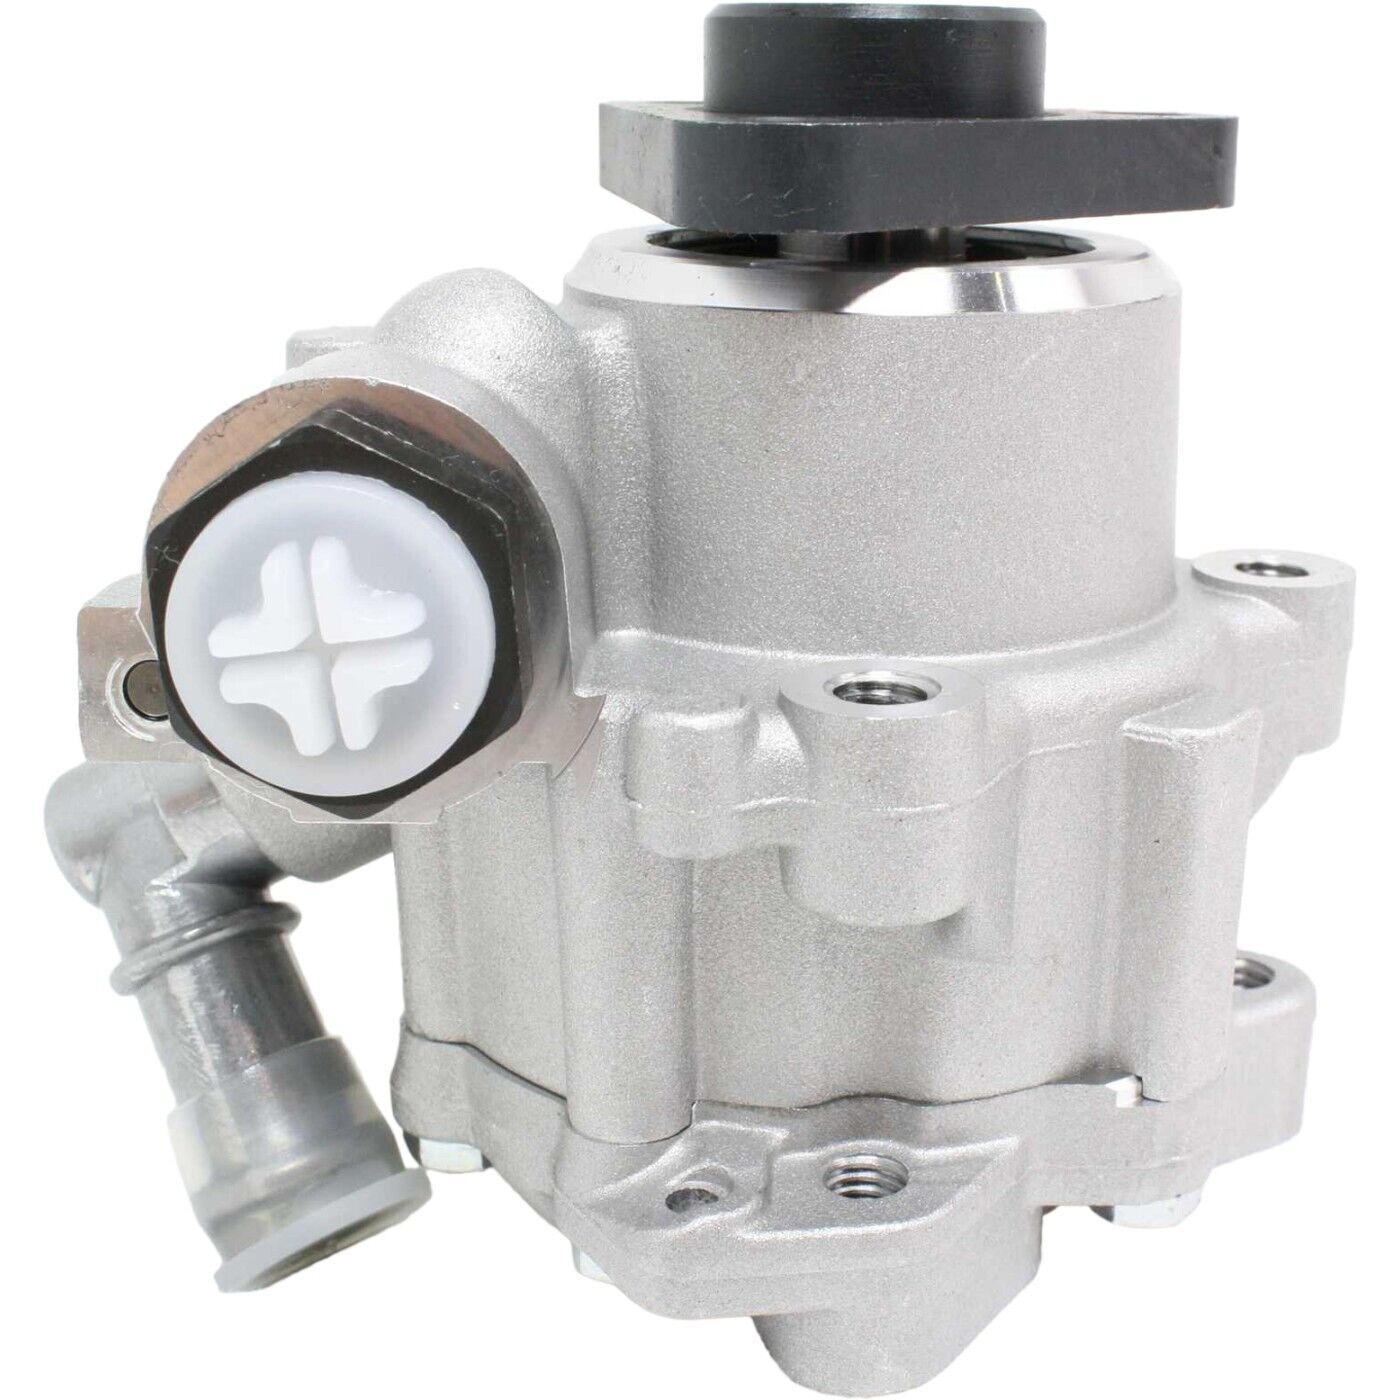 New Power Steering Pump ID LF-30 E46 3 Series for BMW 325i 328i 32411094965